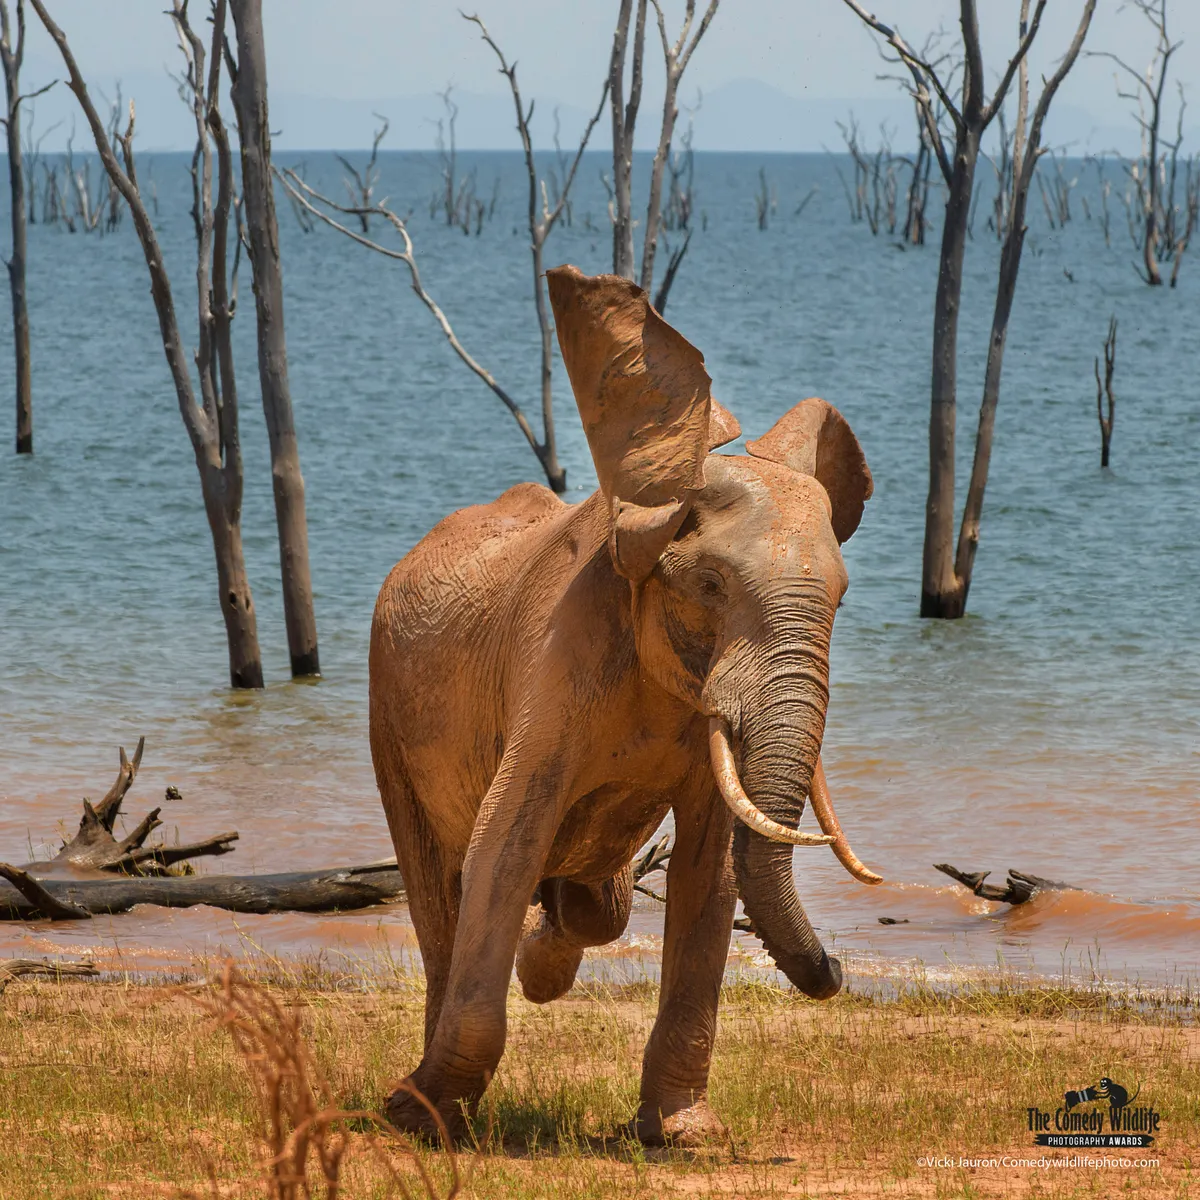 In front of a blue lake (with dead trees sticking up out of it), a young elephant takes a mud bath, standing on all four legs with its ears up in the air.